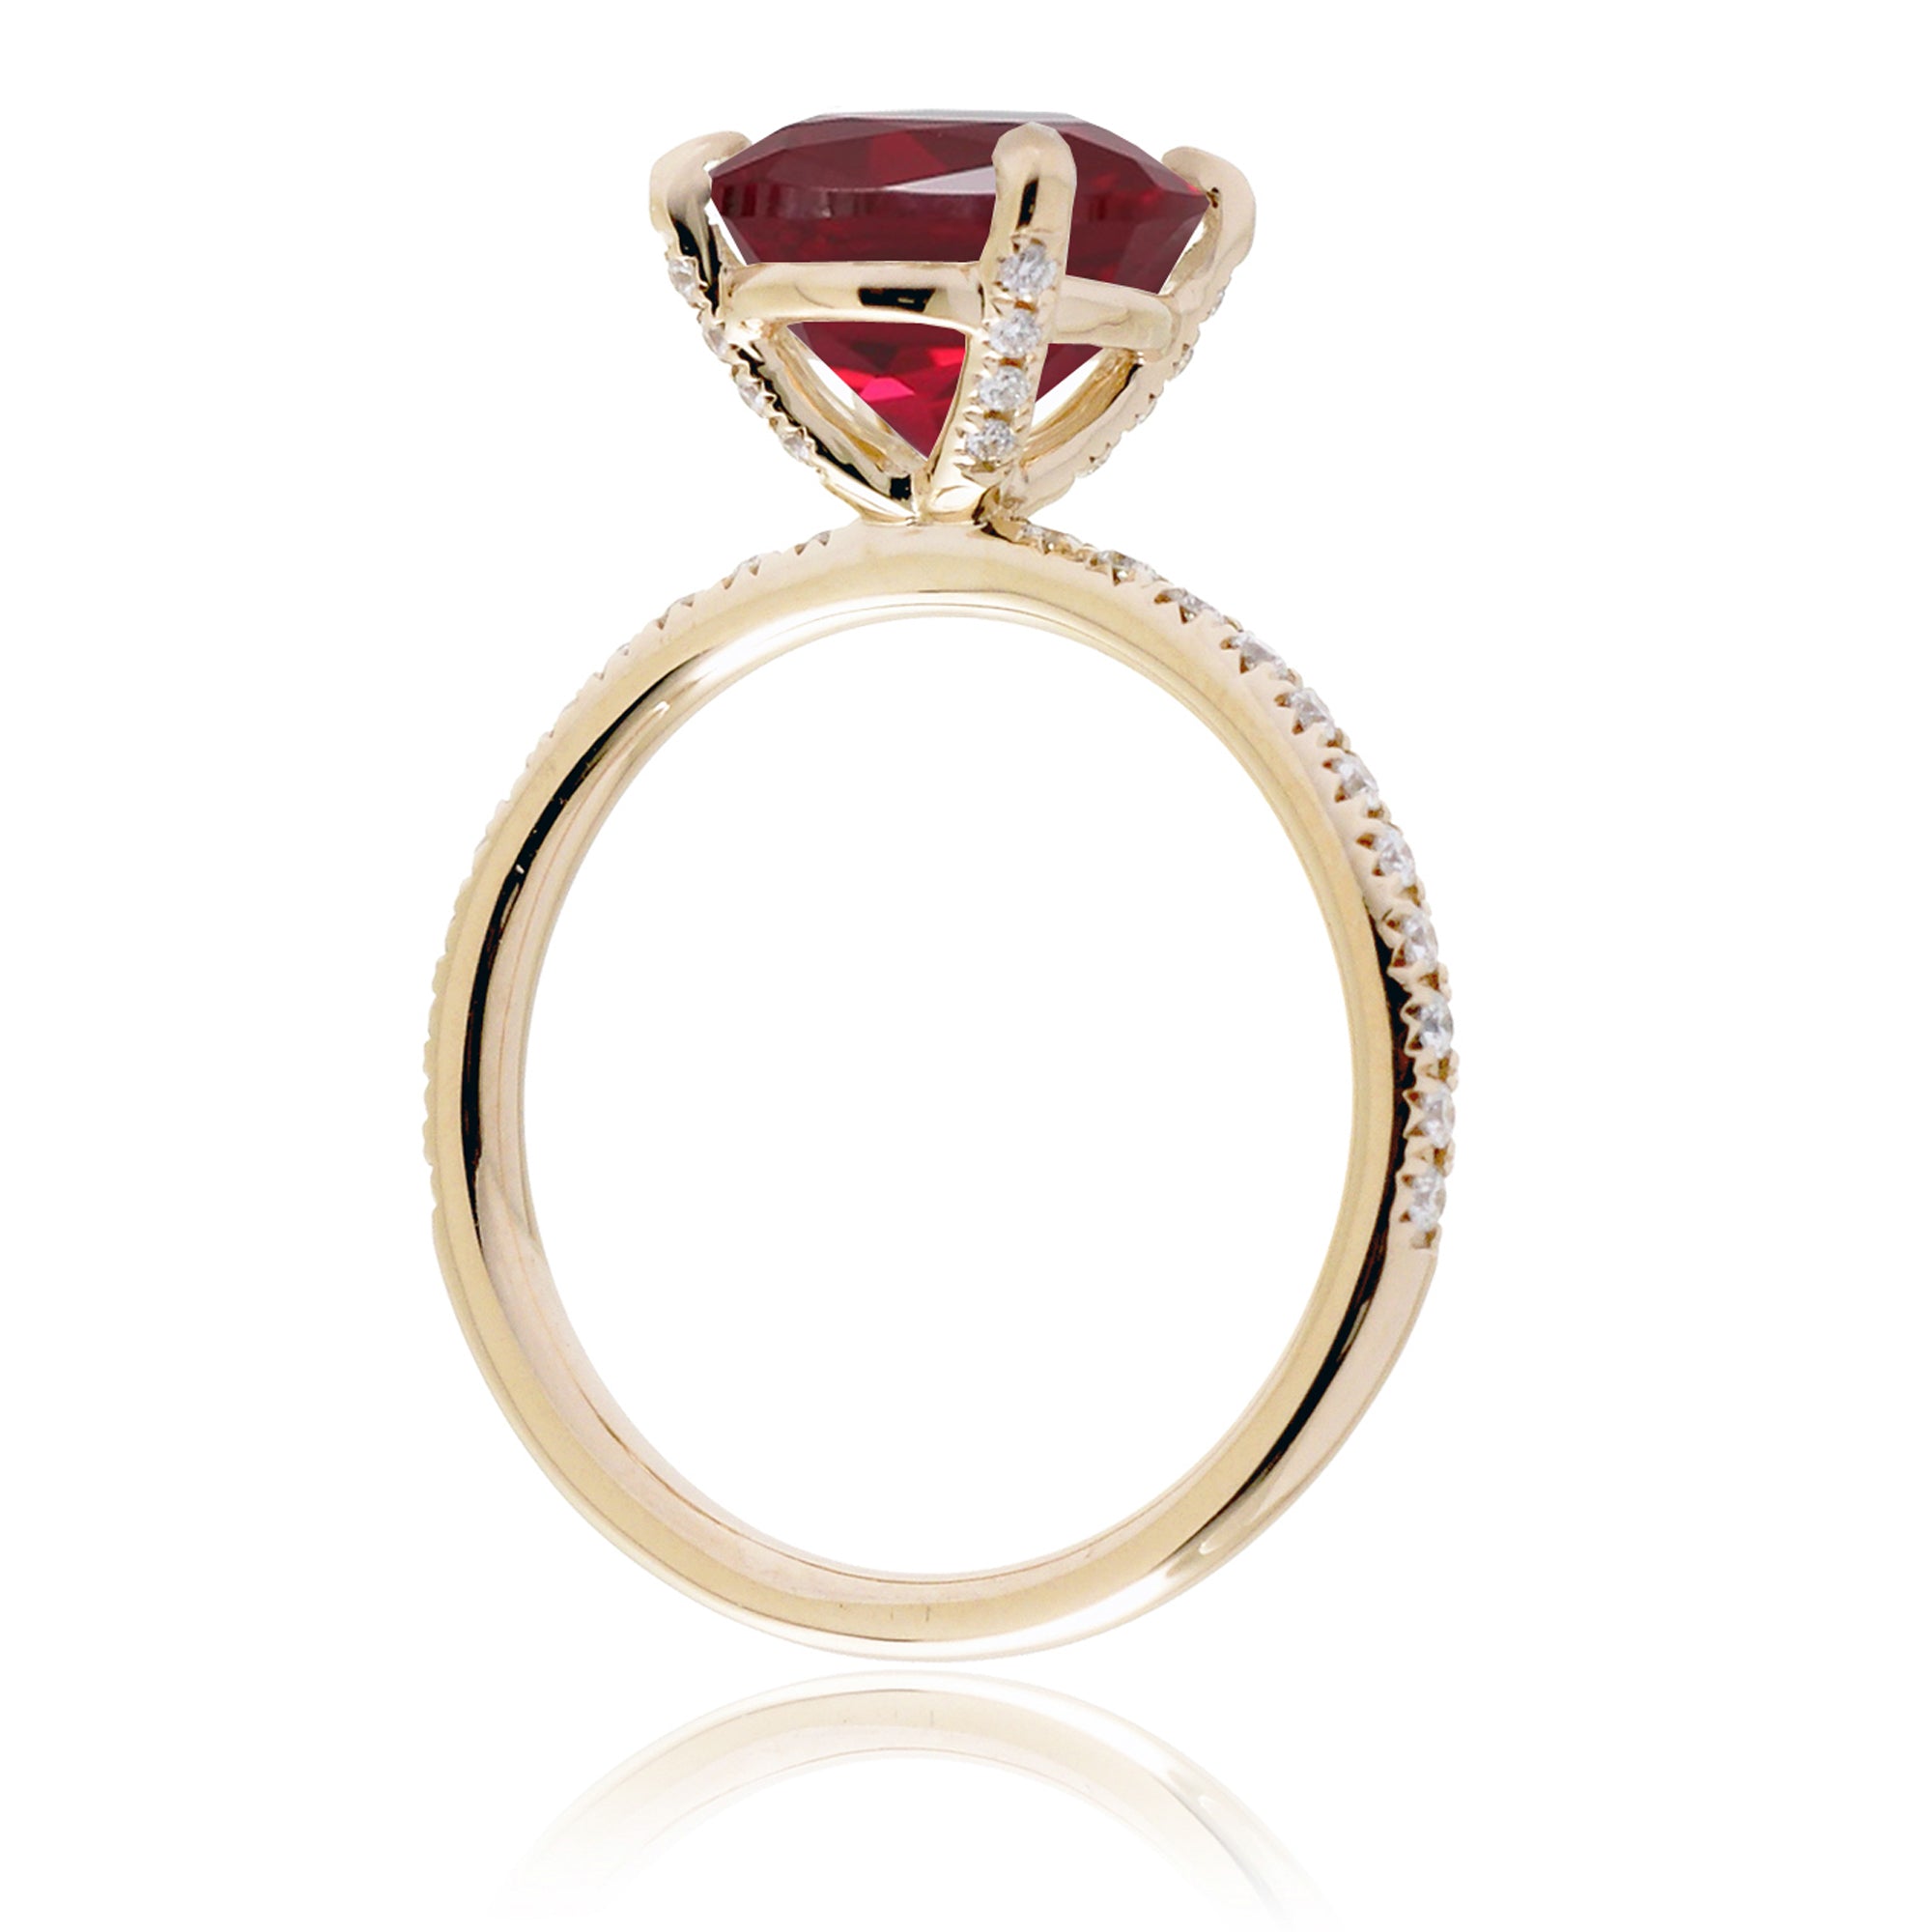 Oval lab-grown ruby diamond band engagement ring yellow gold - the Ava